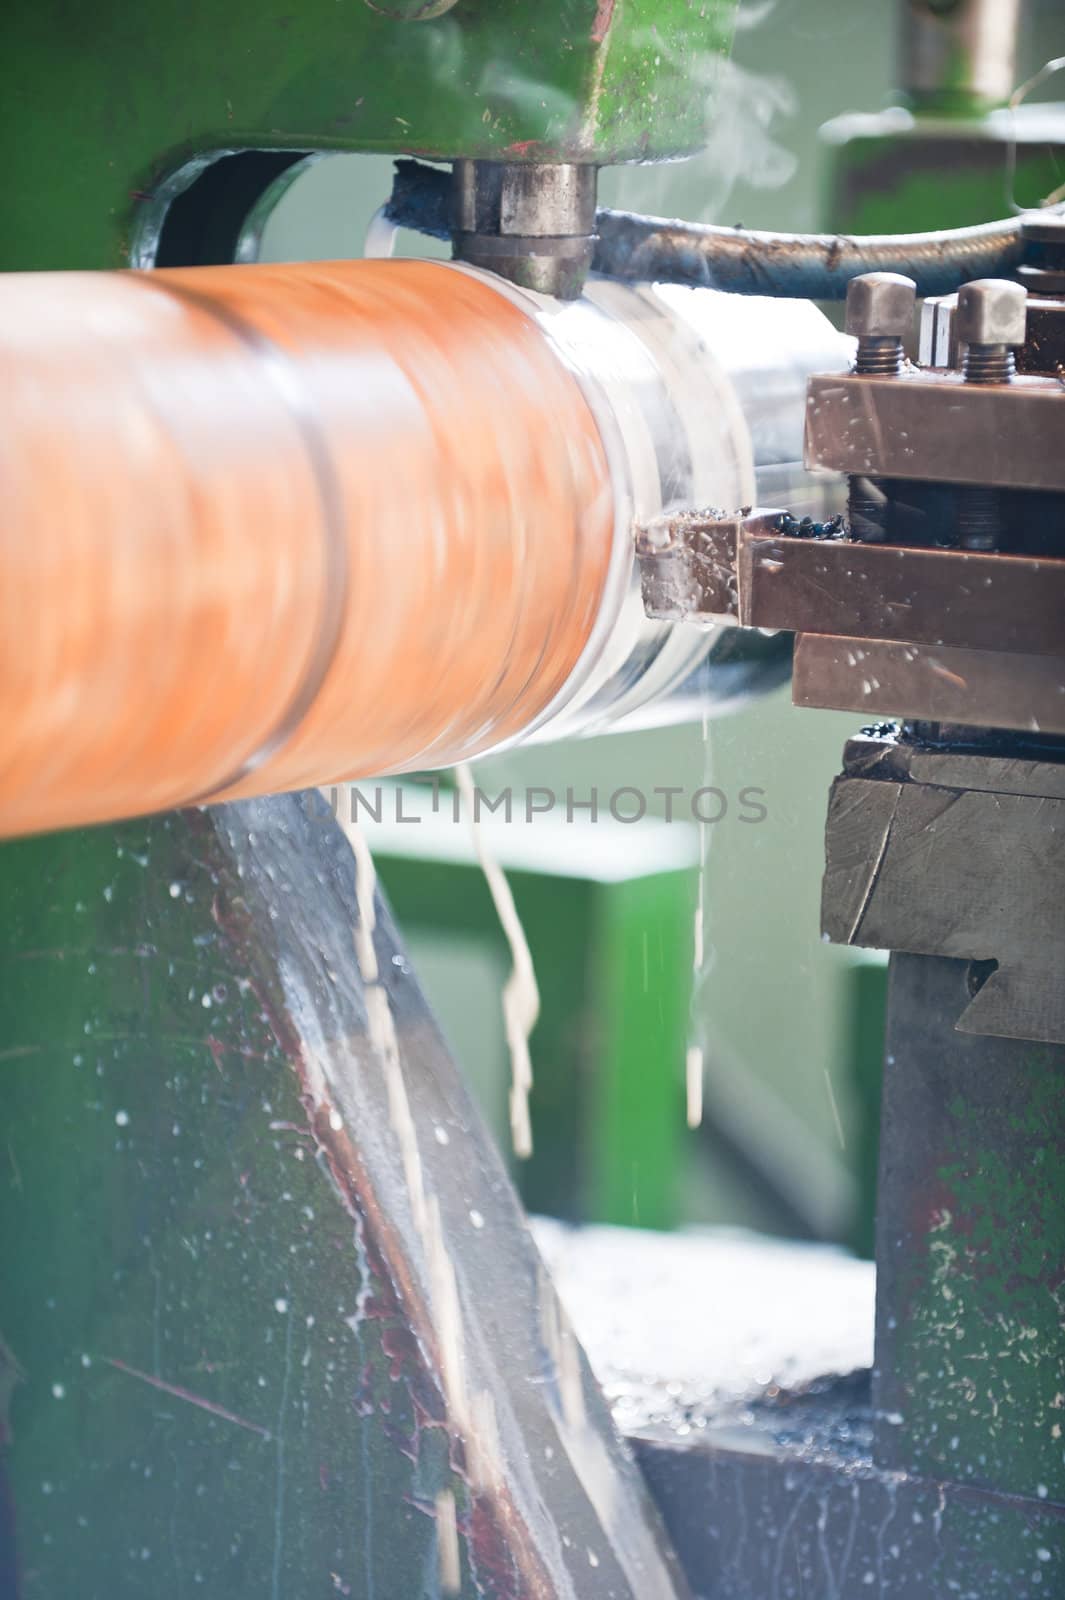 Lathe Turning Stainless Steel. Motion blur and shallow depth of field.